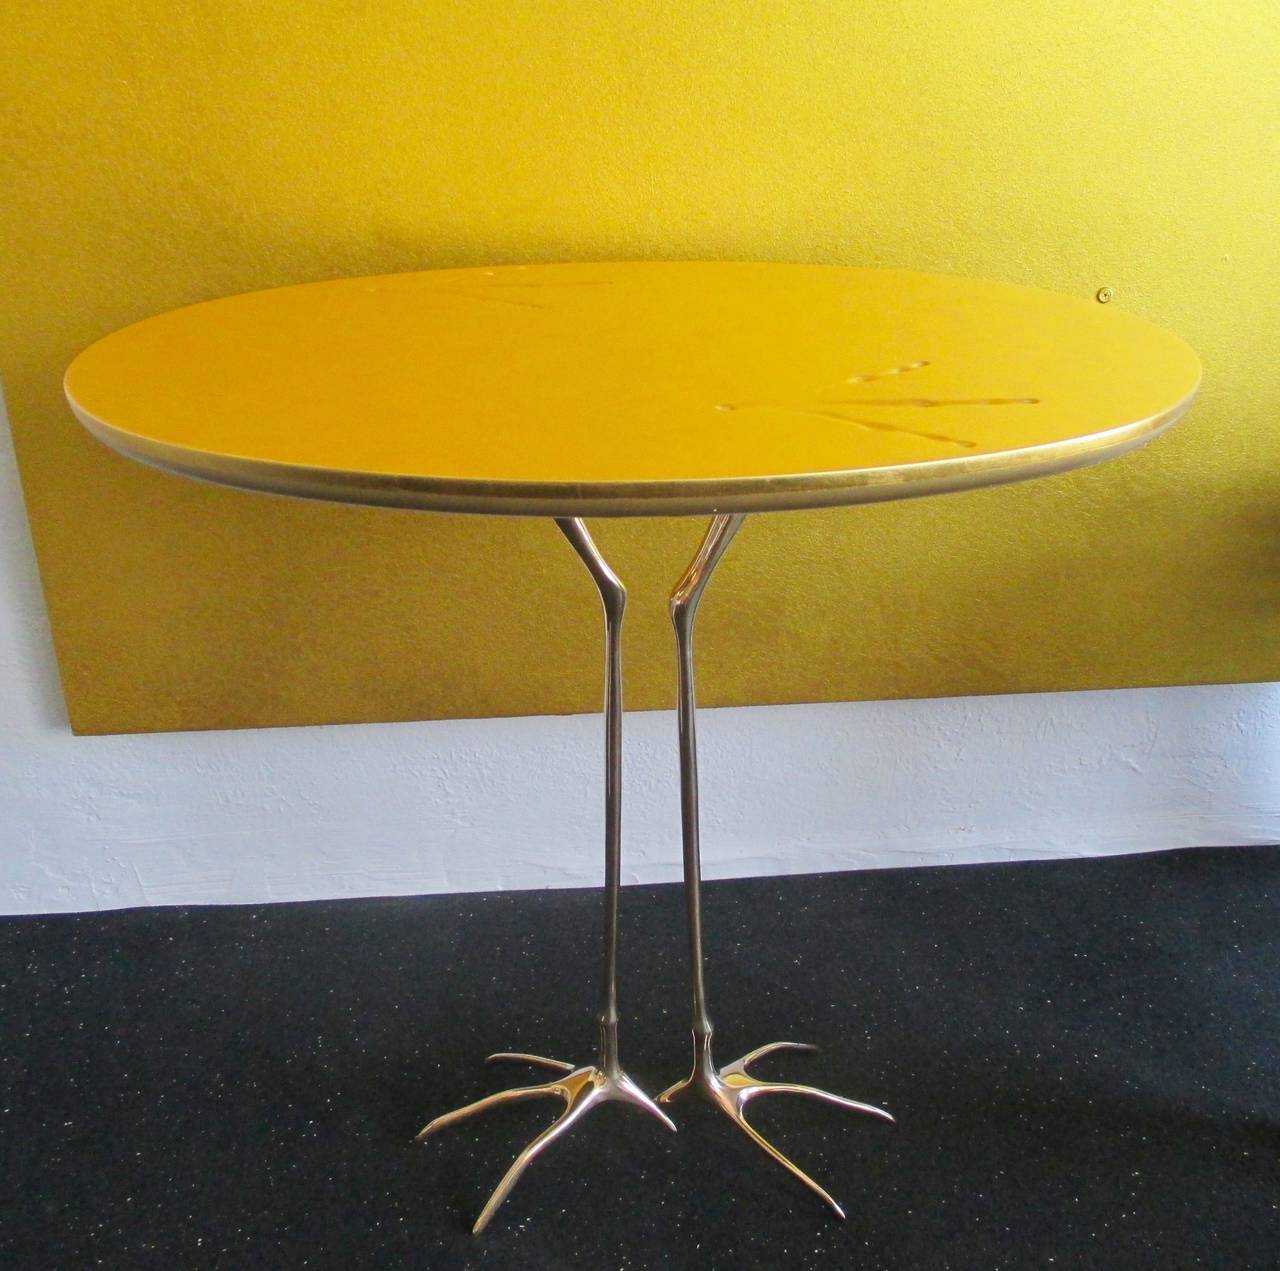 Brushed SMALL TABLE GOLD LEAFED W/BRASS LEGS  by Meret Oppenheim